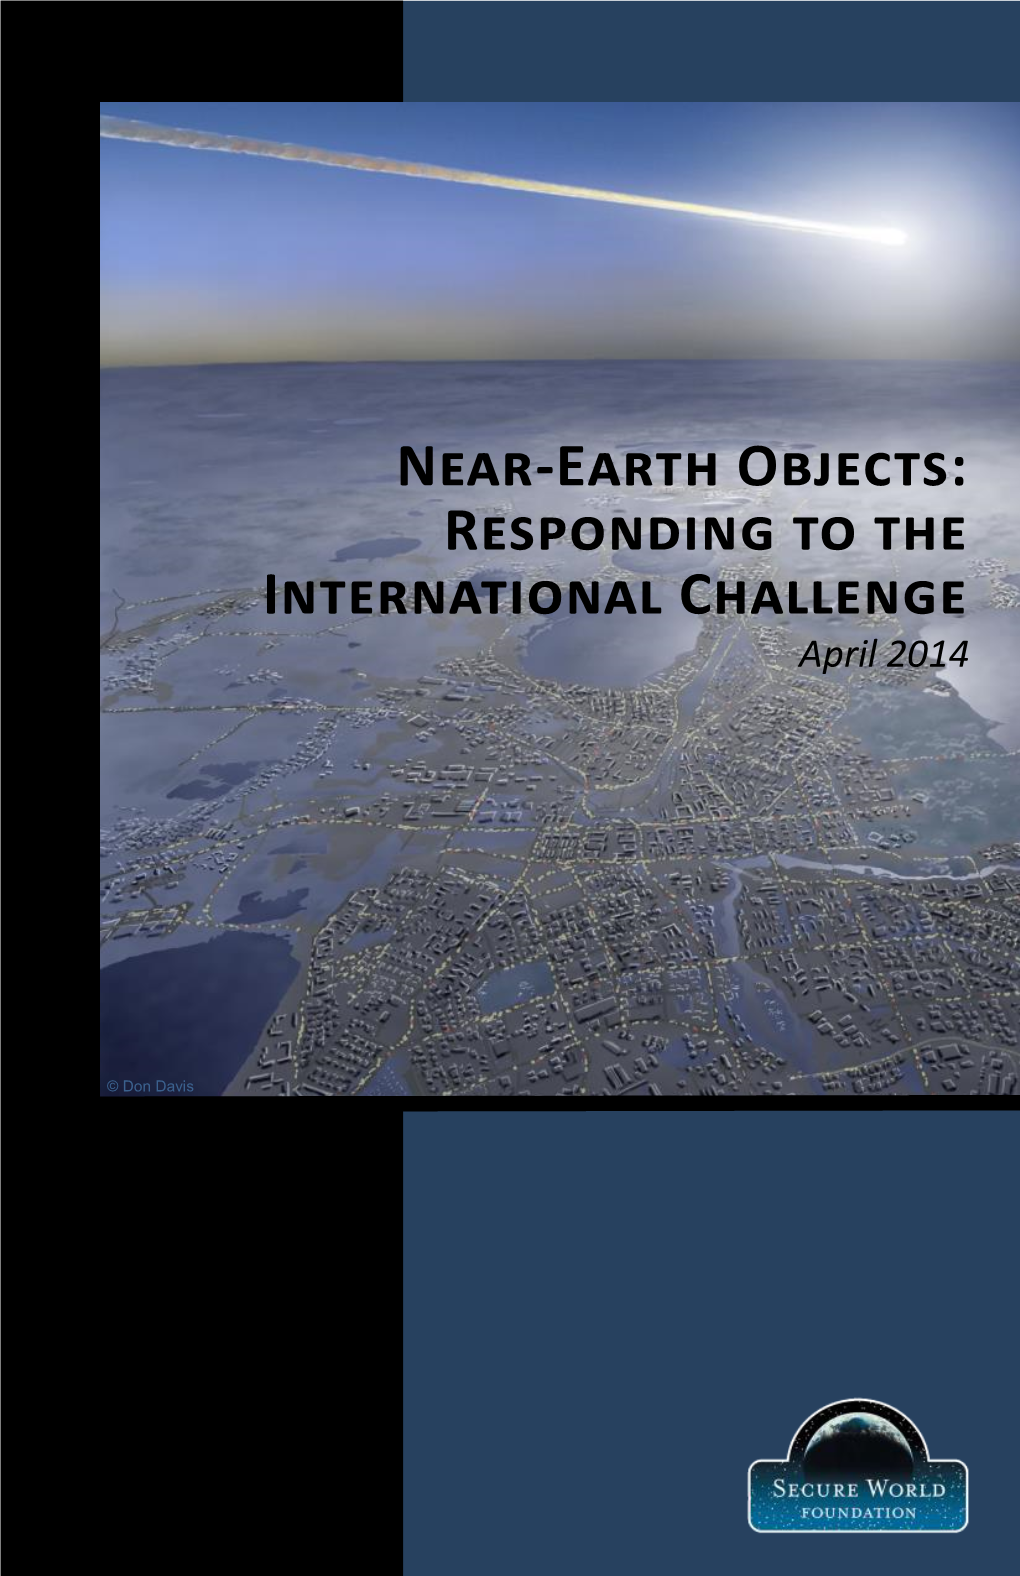 Near-Earth Objects: Responding to the International Challenge April 2014